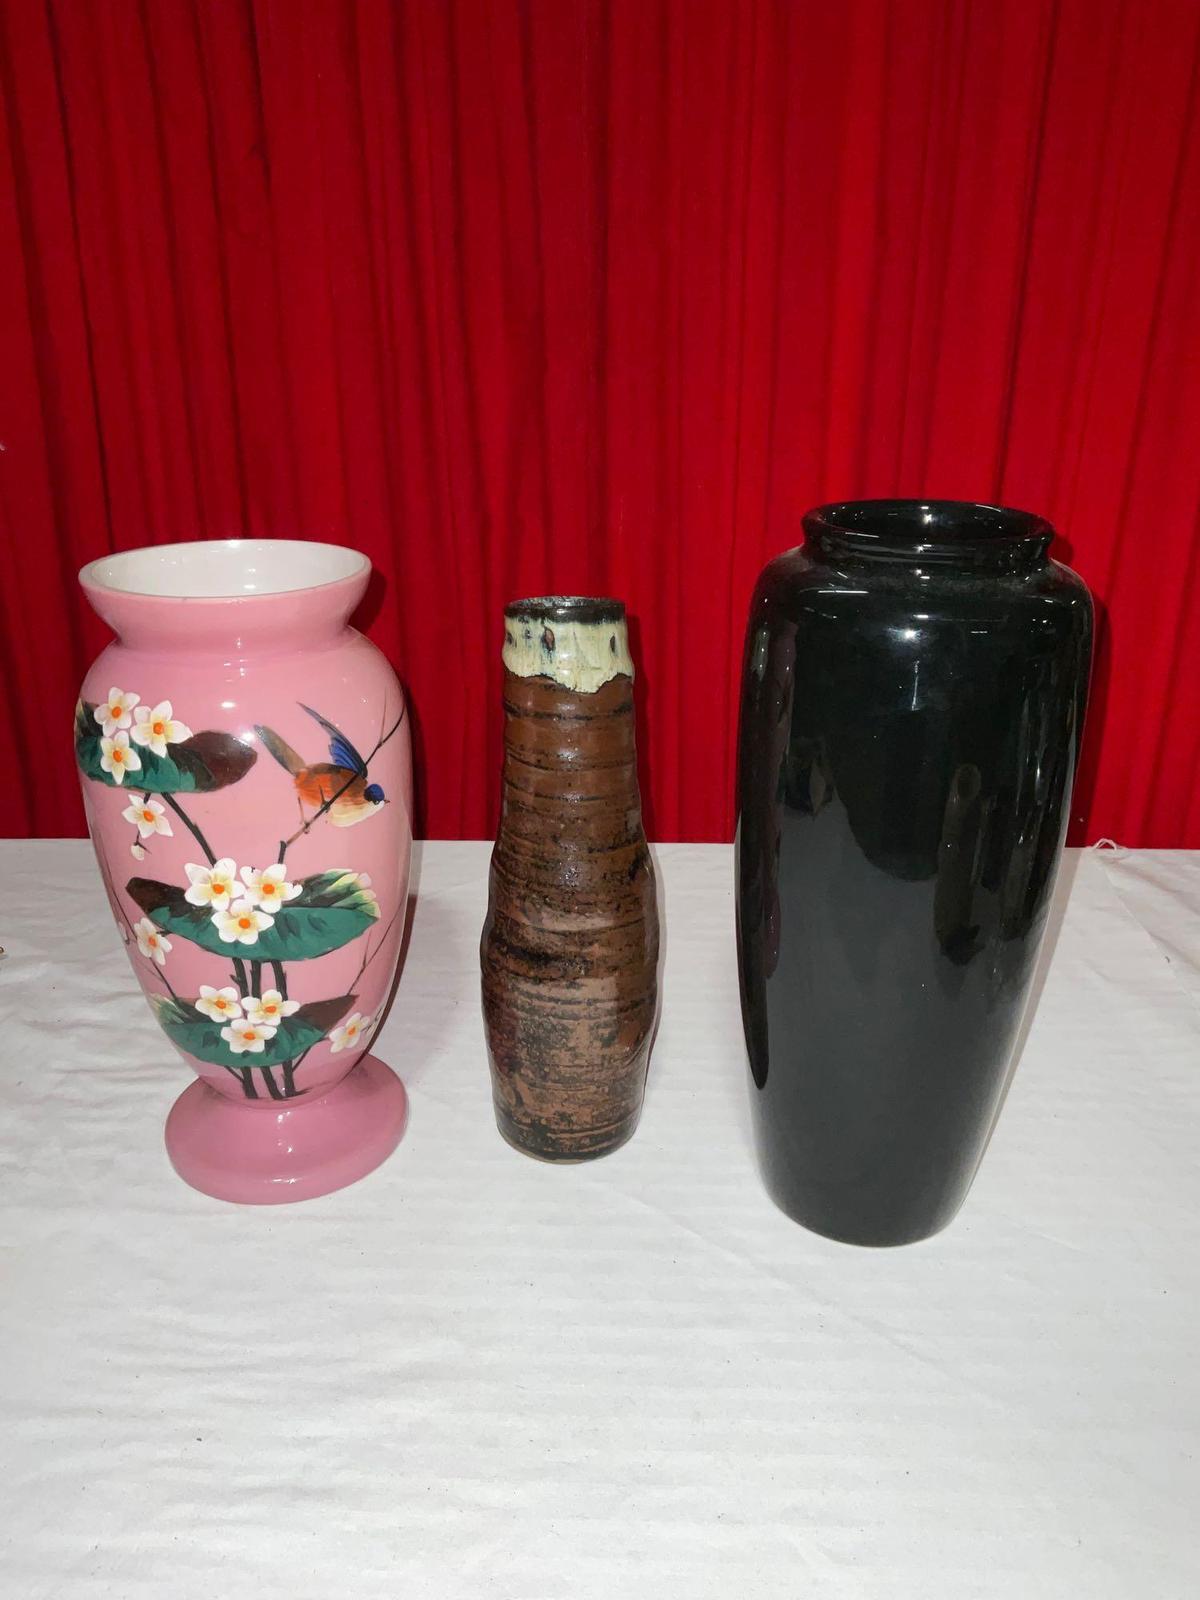 Set of three races, one porcelain W/bird and flower motif, hand thrown pottery, and black ceramic